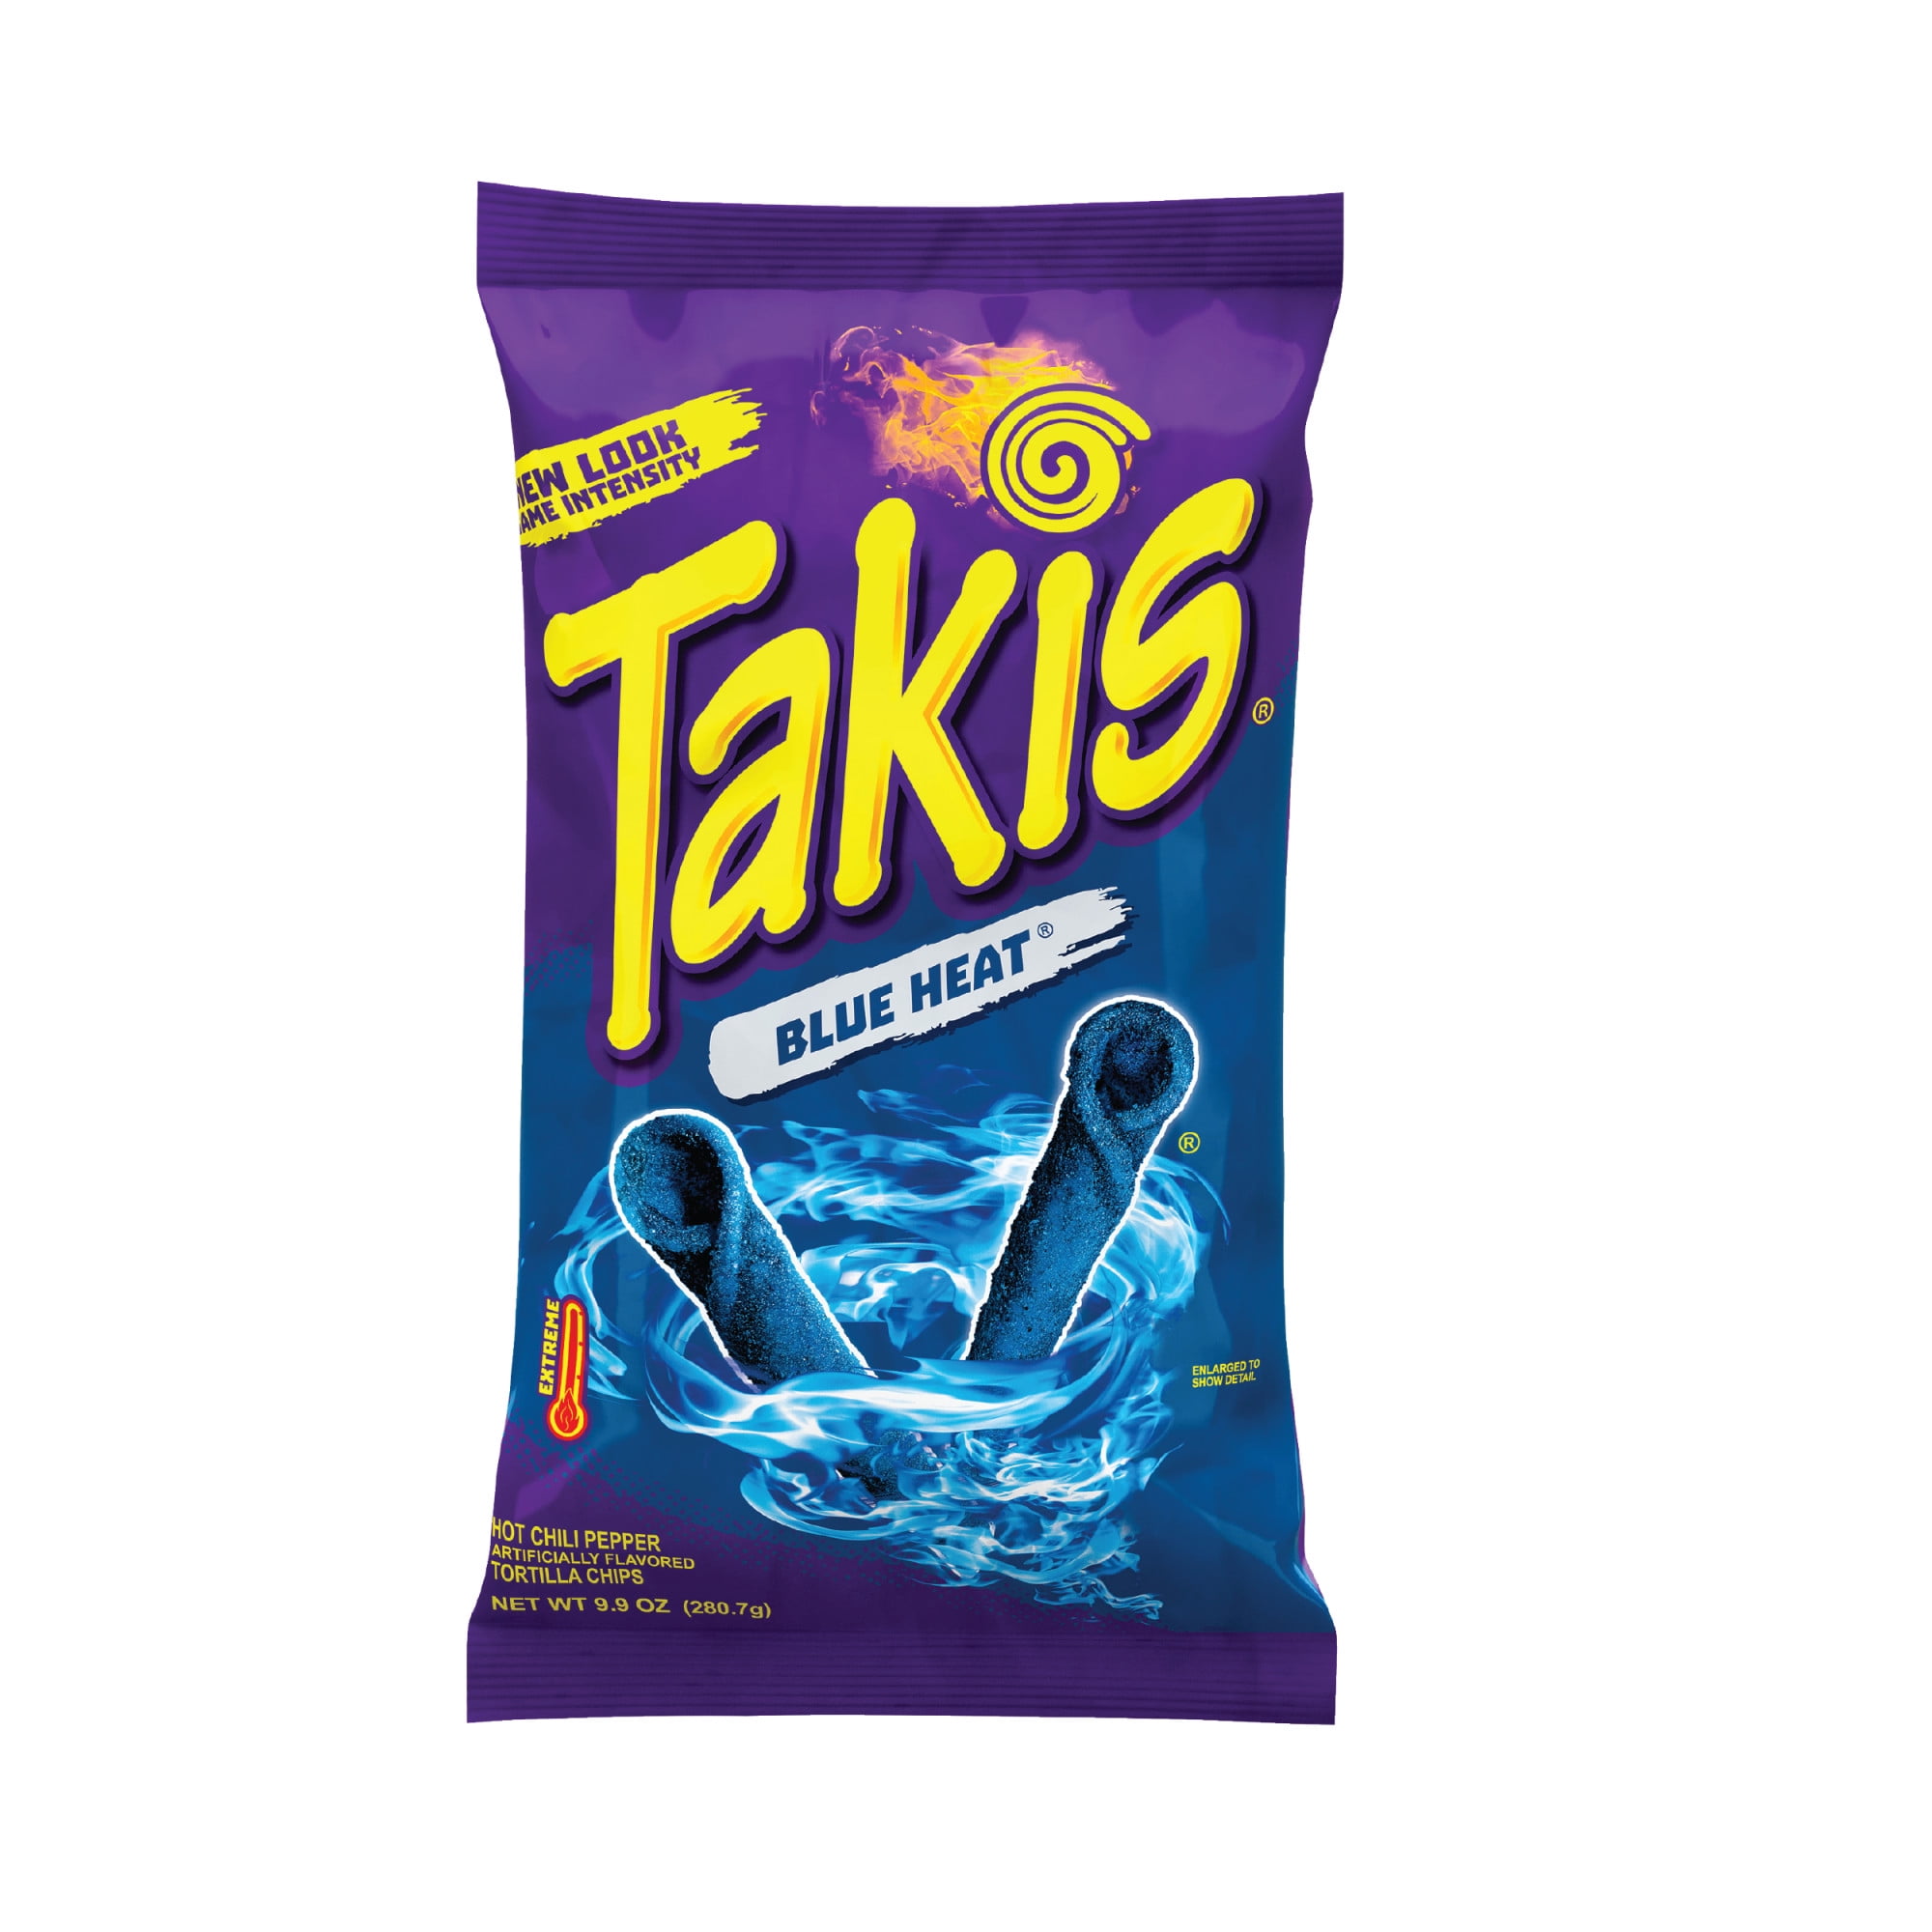 Takis Blue Heat Rolls 9.9 oz Bag,  Hot Chili Pepper Flavored Spicy Tortilla Chips